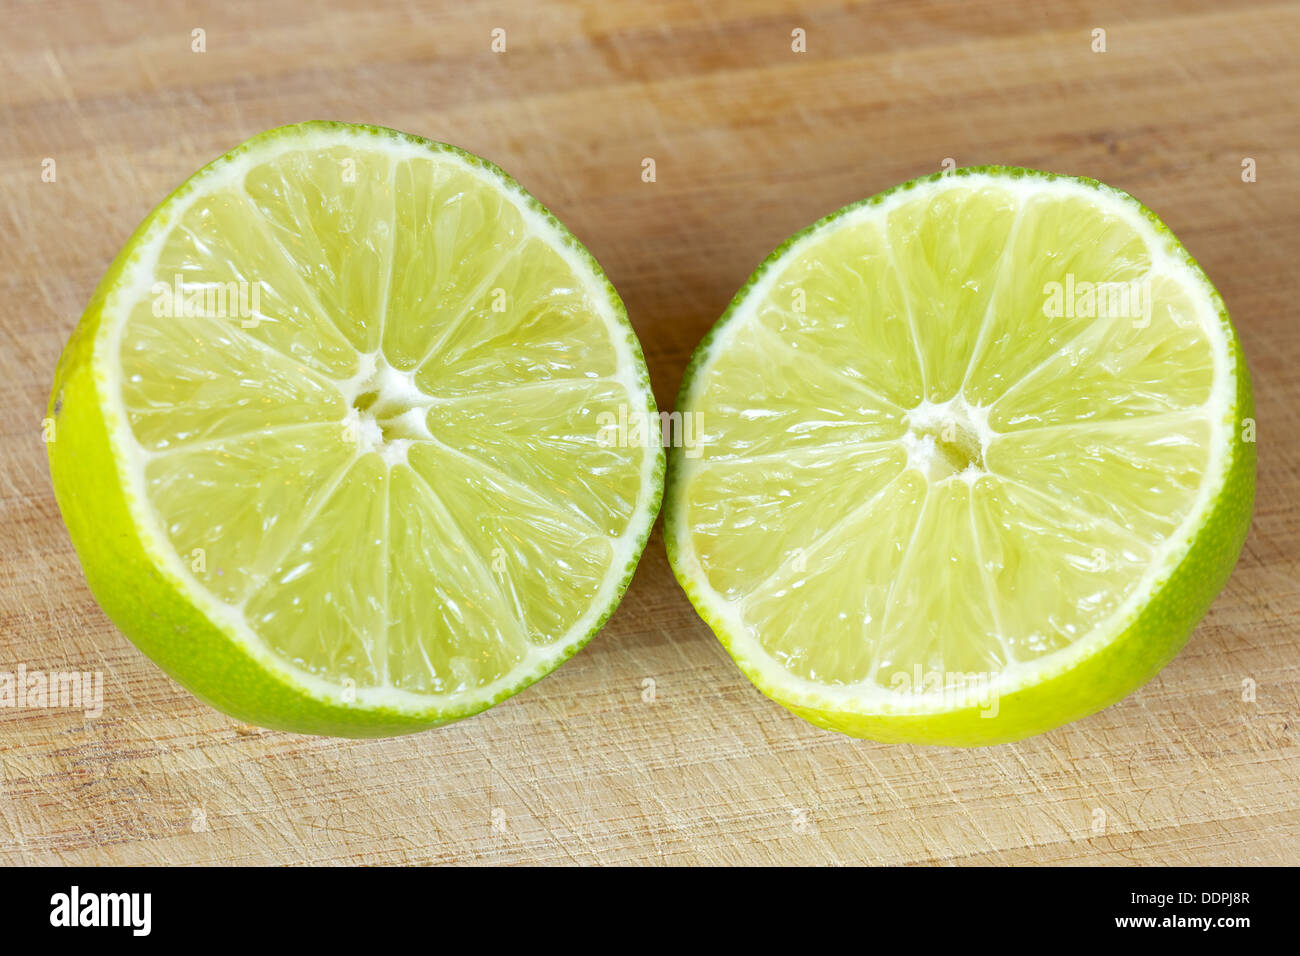 Lime slice open on a cutting board Stock Photo